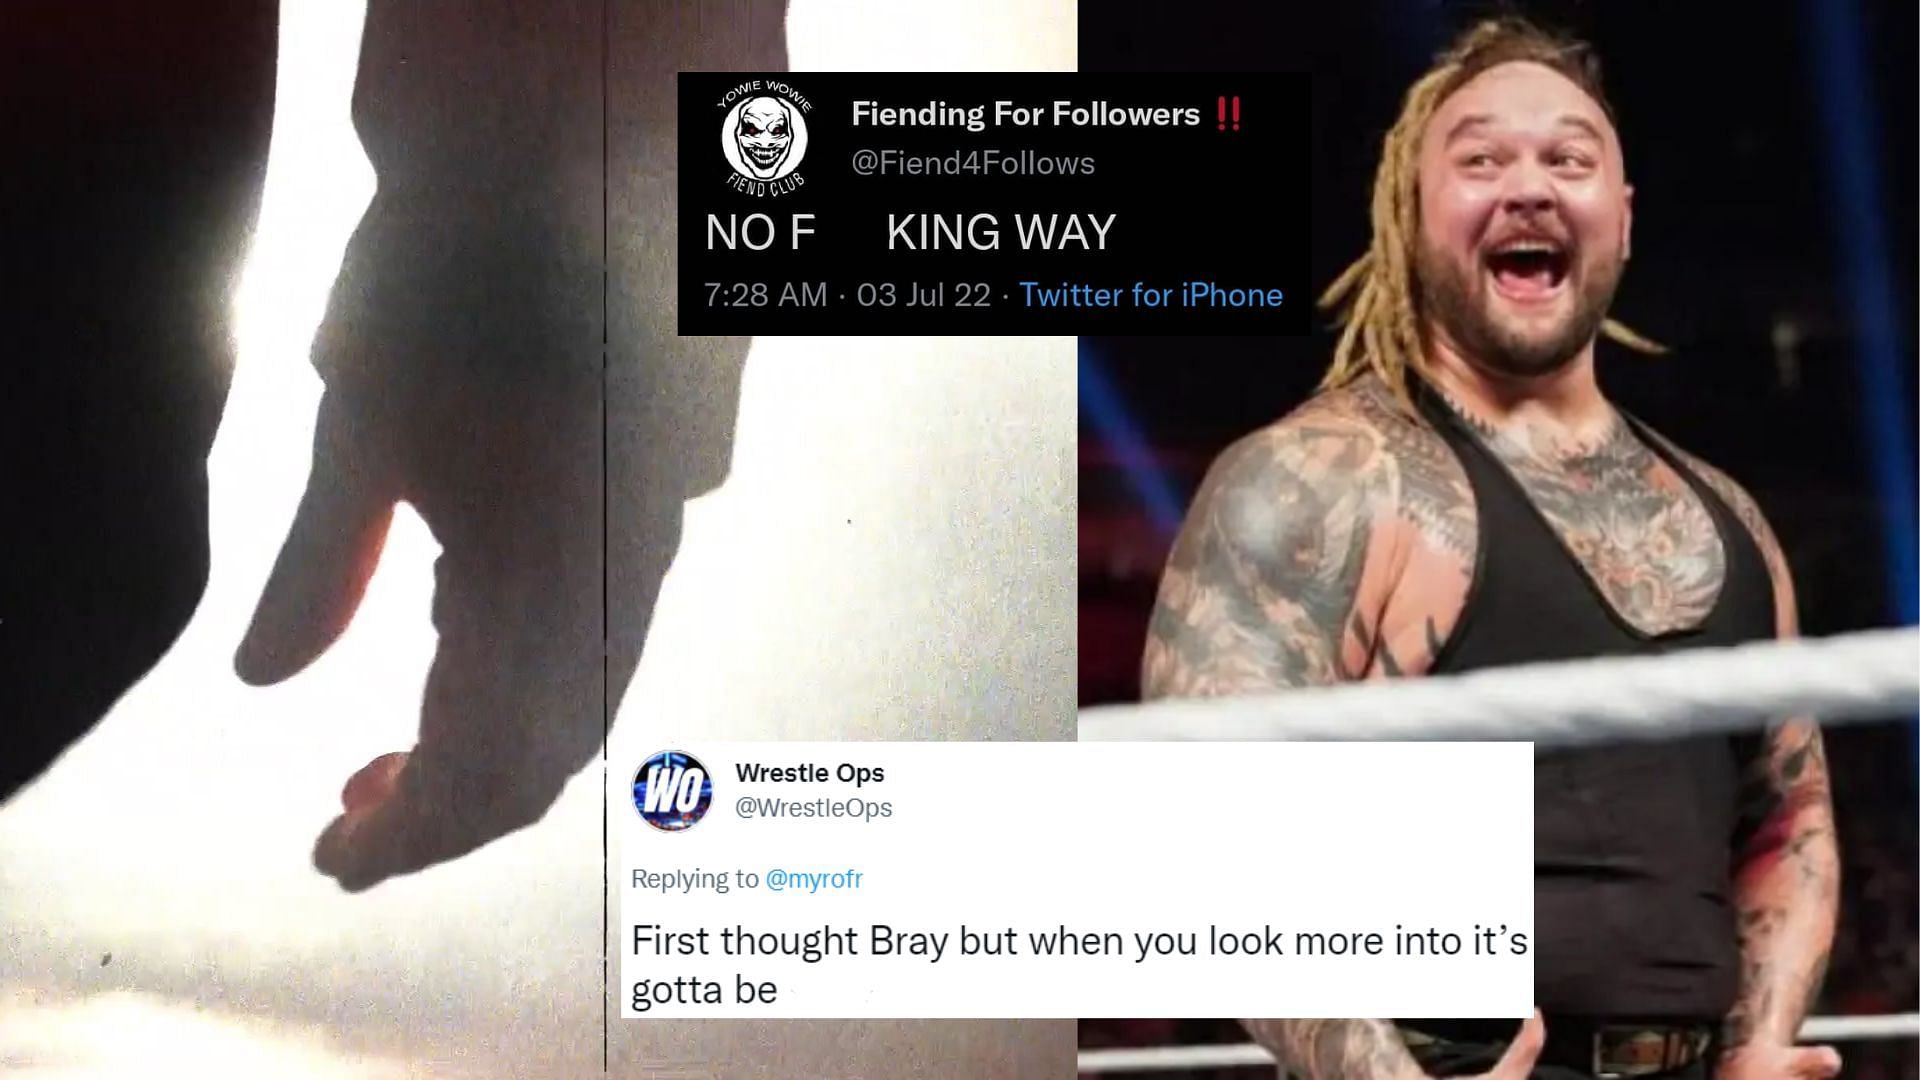 Bray Wyatt was trending for a while